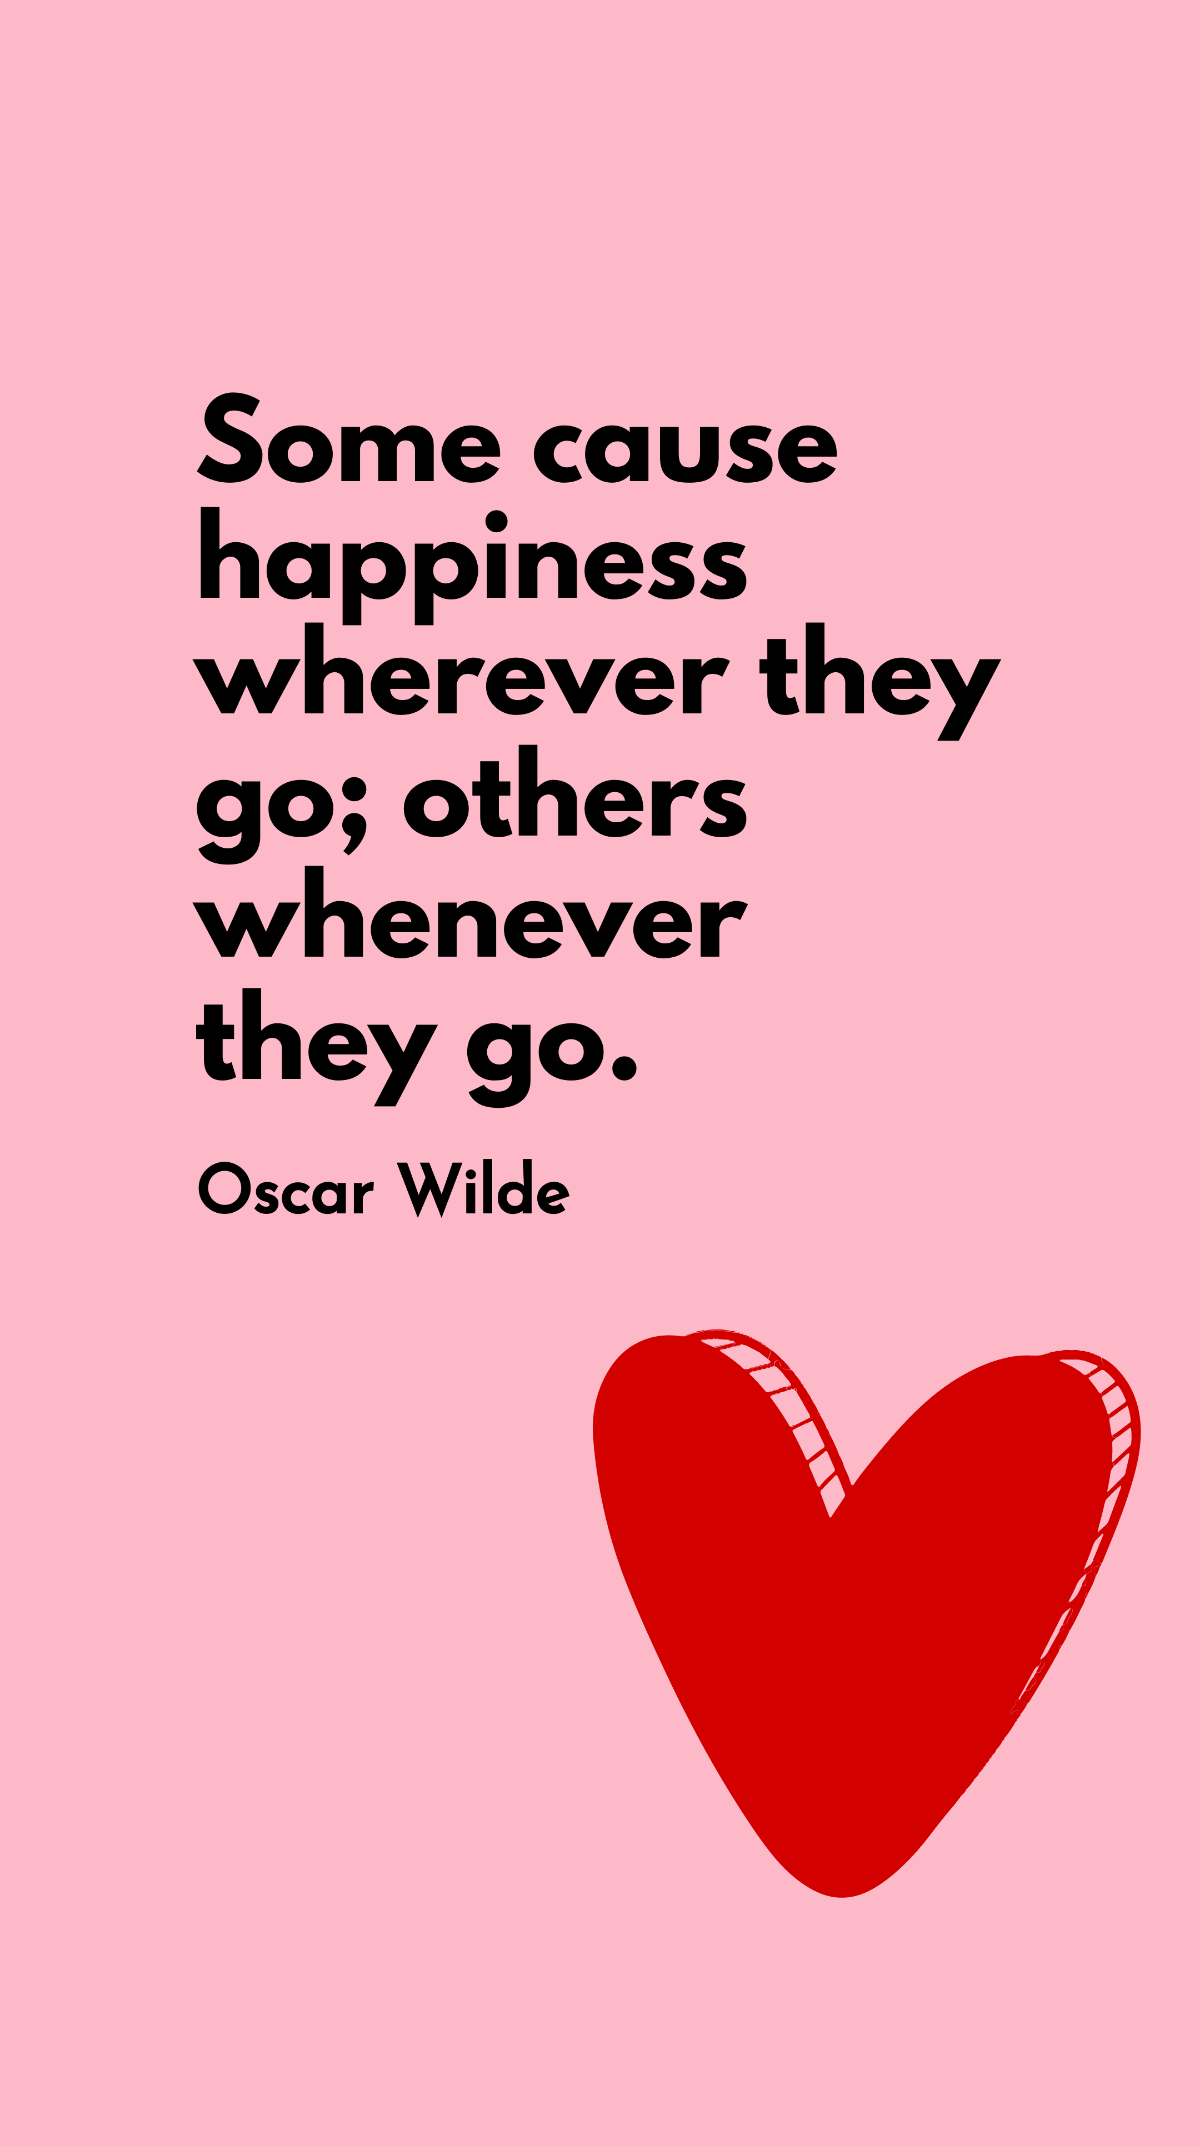 Oscar Wilde - Some cause happiness wherever they go; others whenever they go. Template